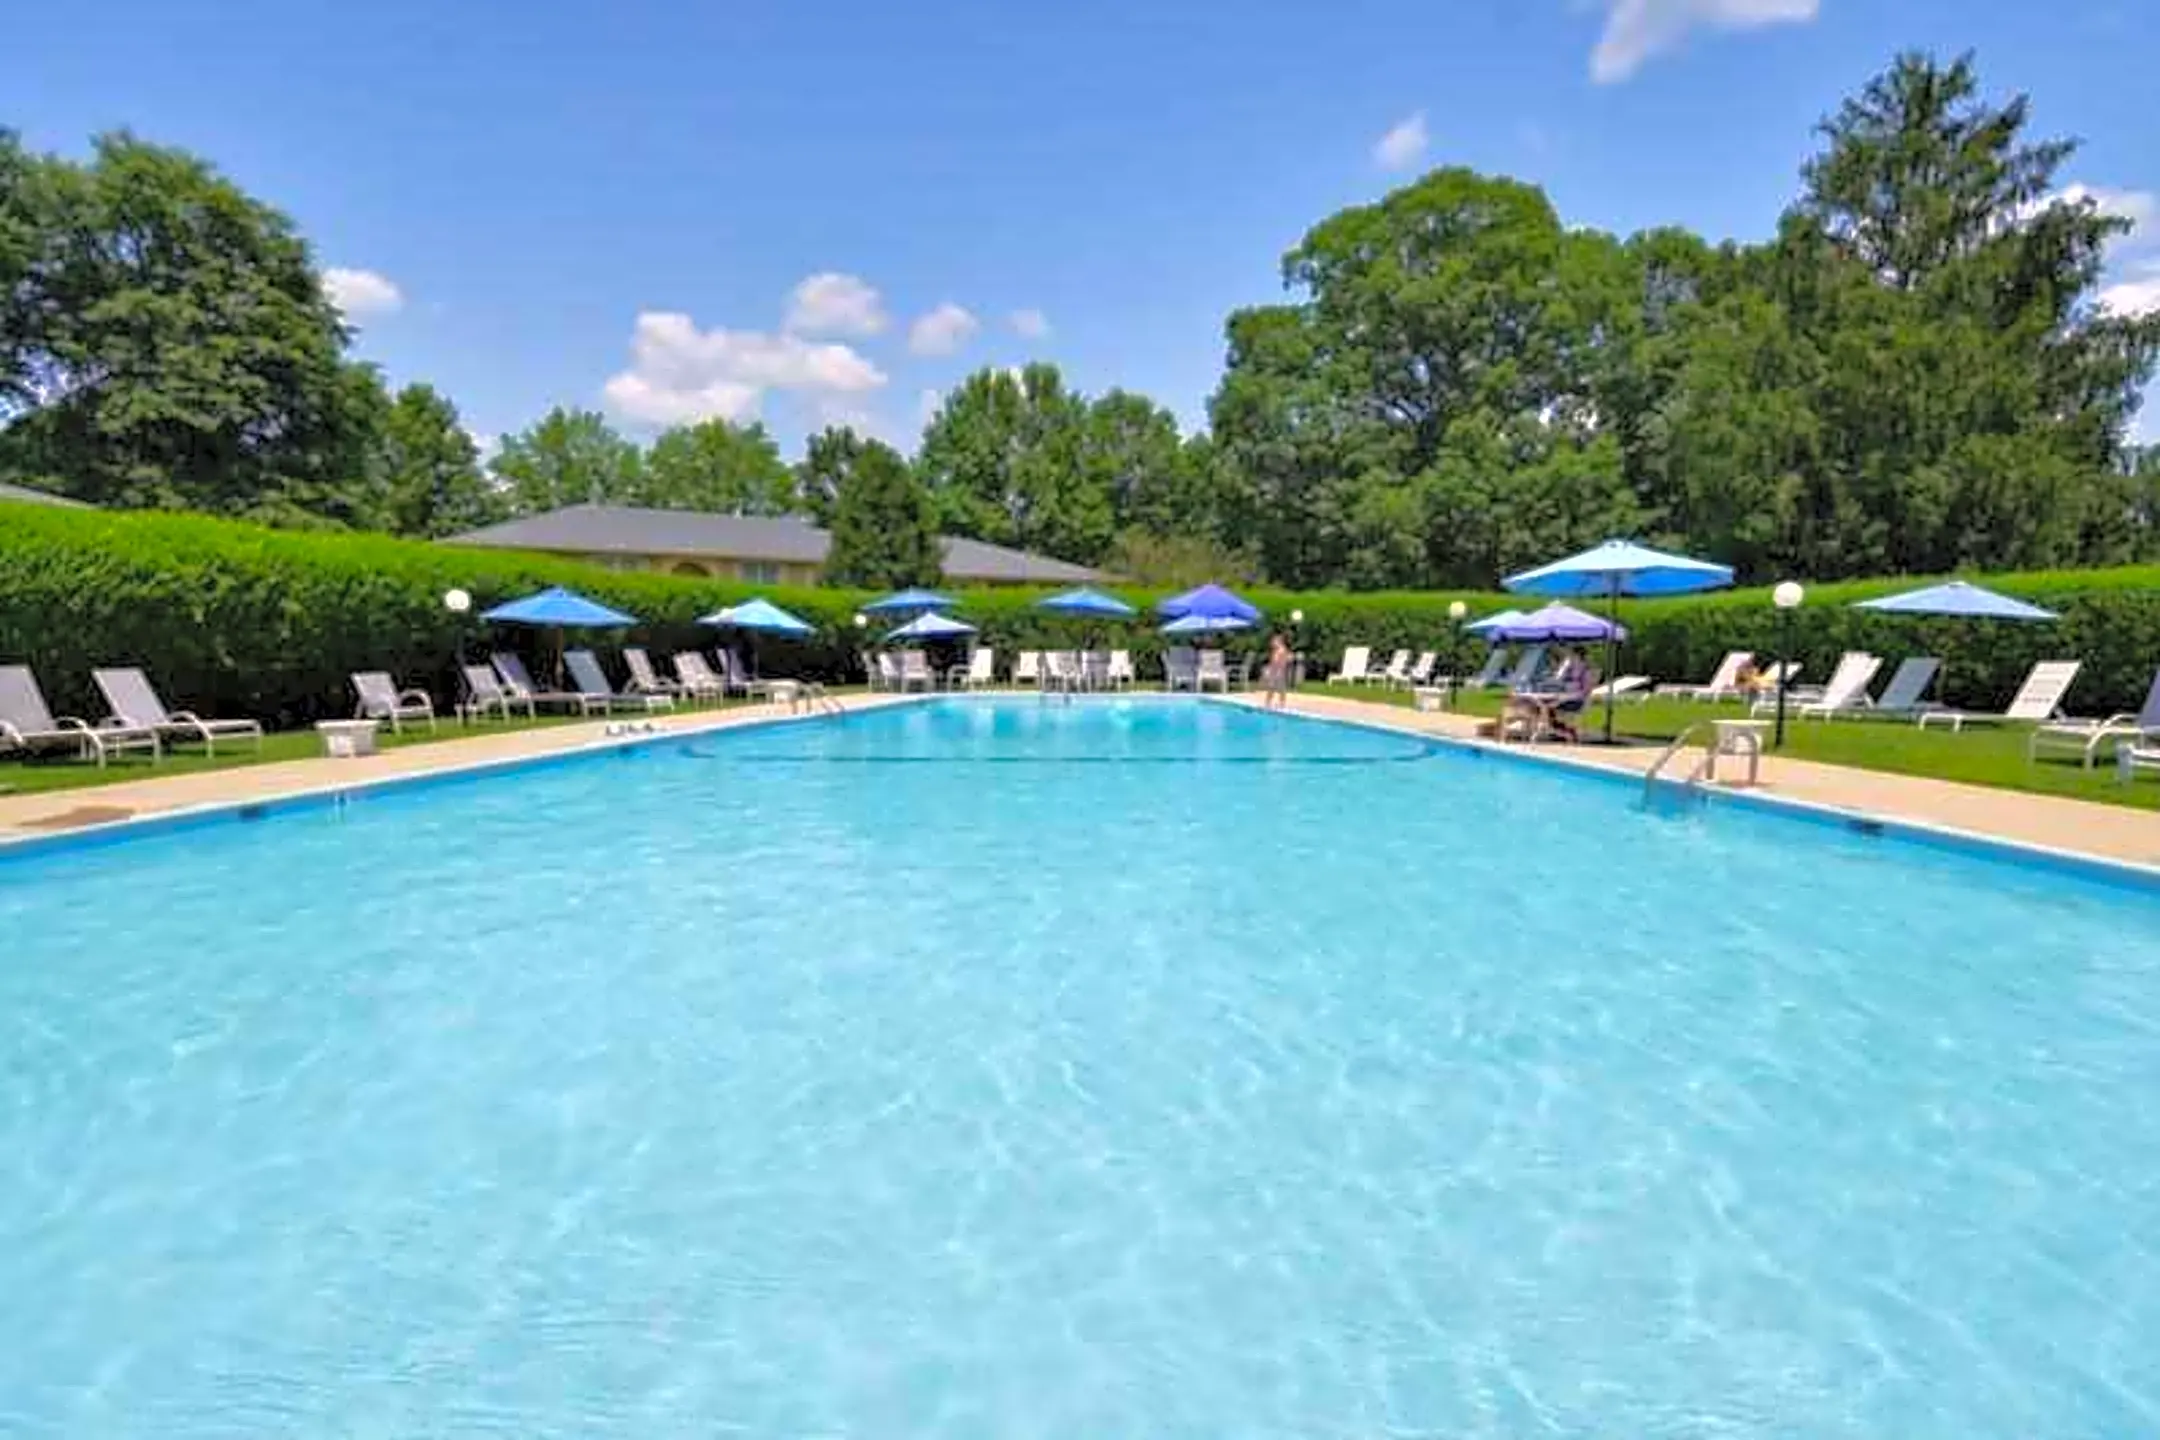 Pool - Hickory Hills Condominiums - Bel Air, MD